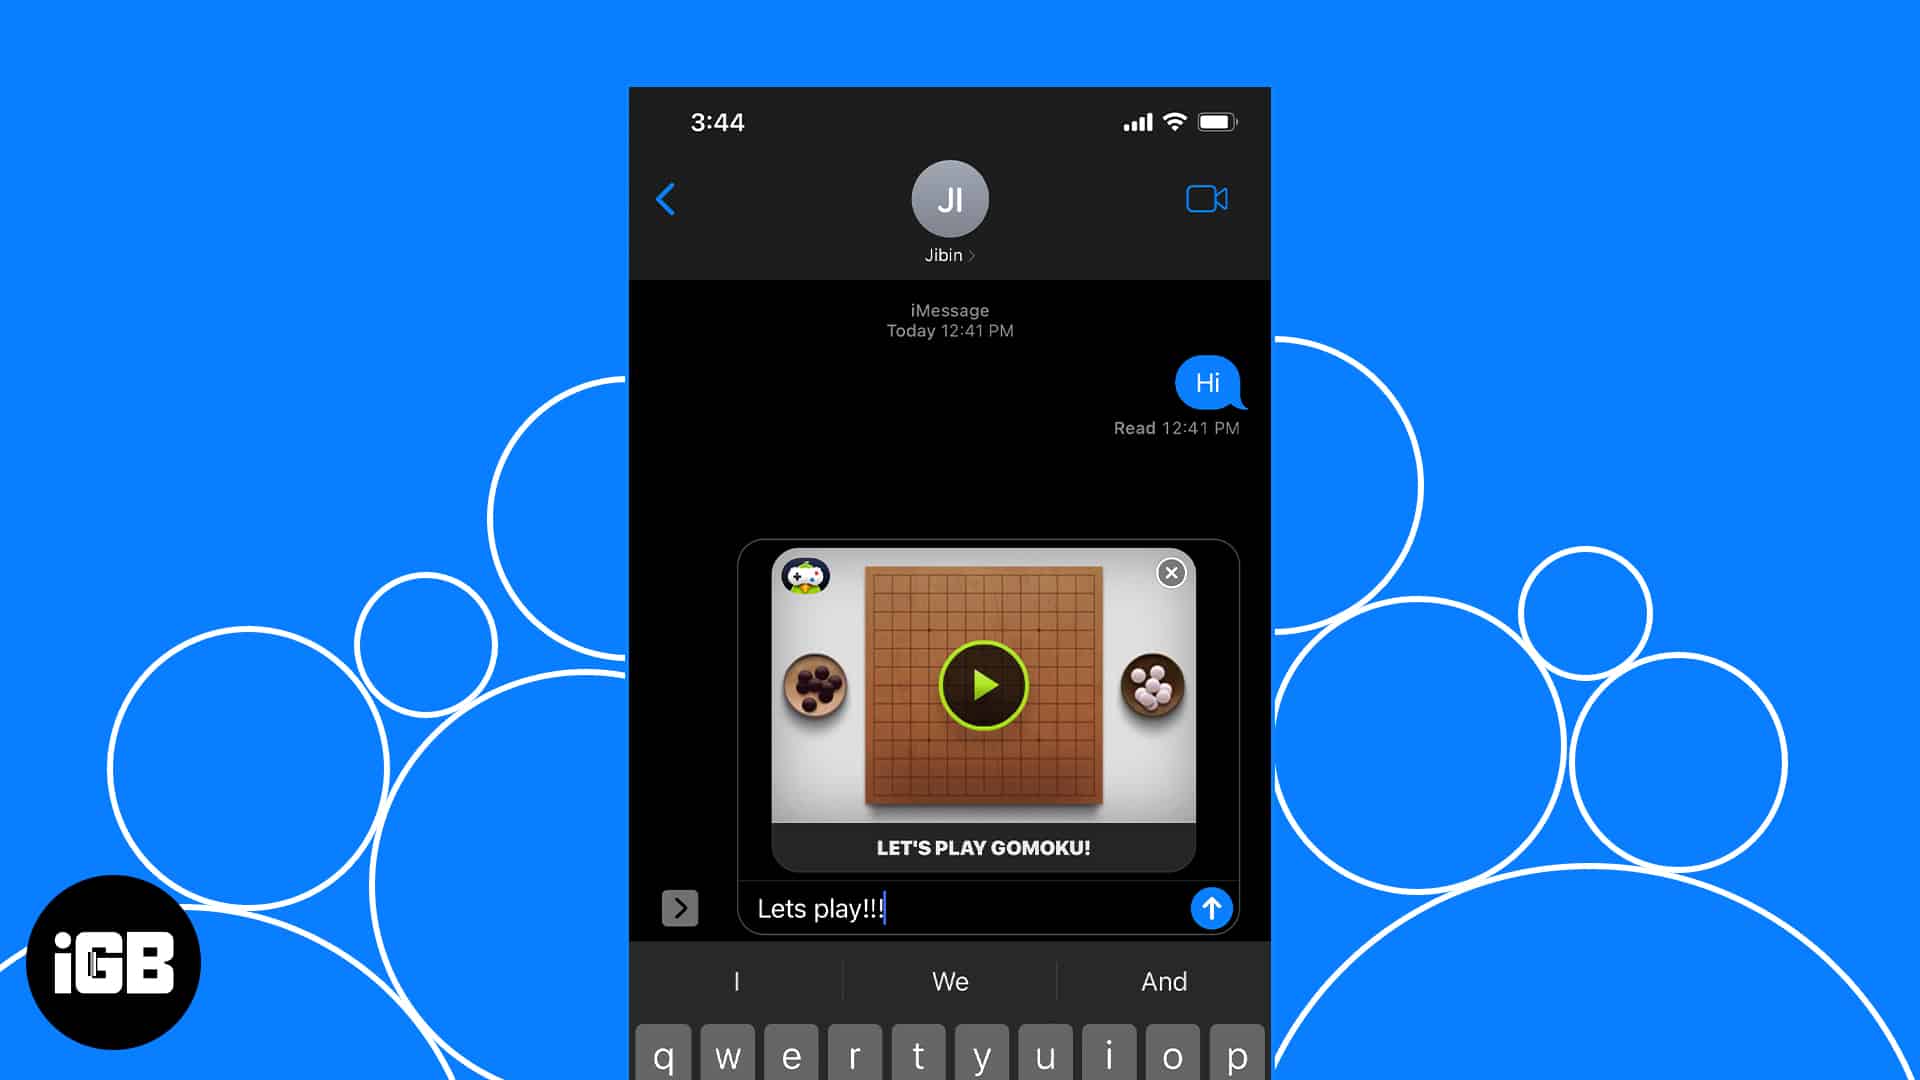 How to play Gomoku in iMessage